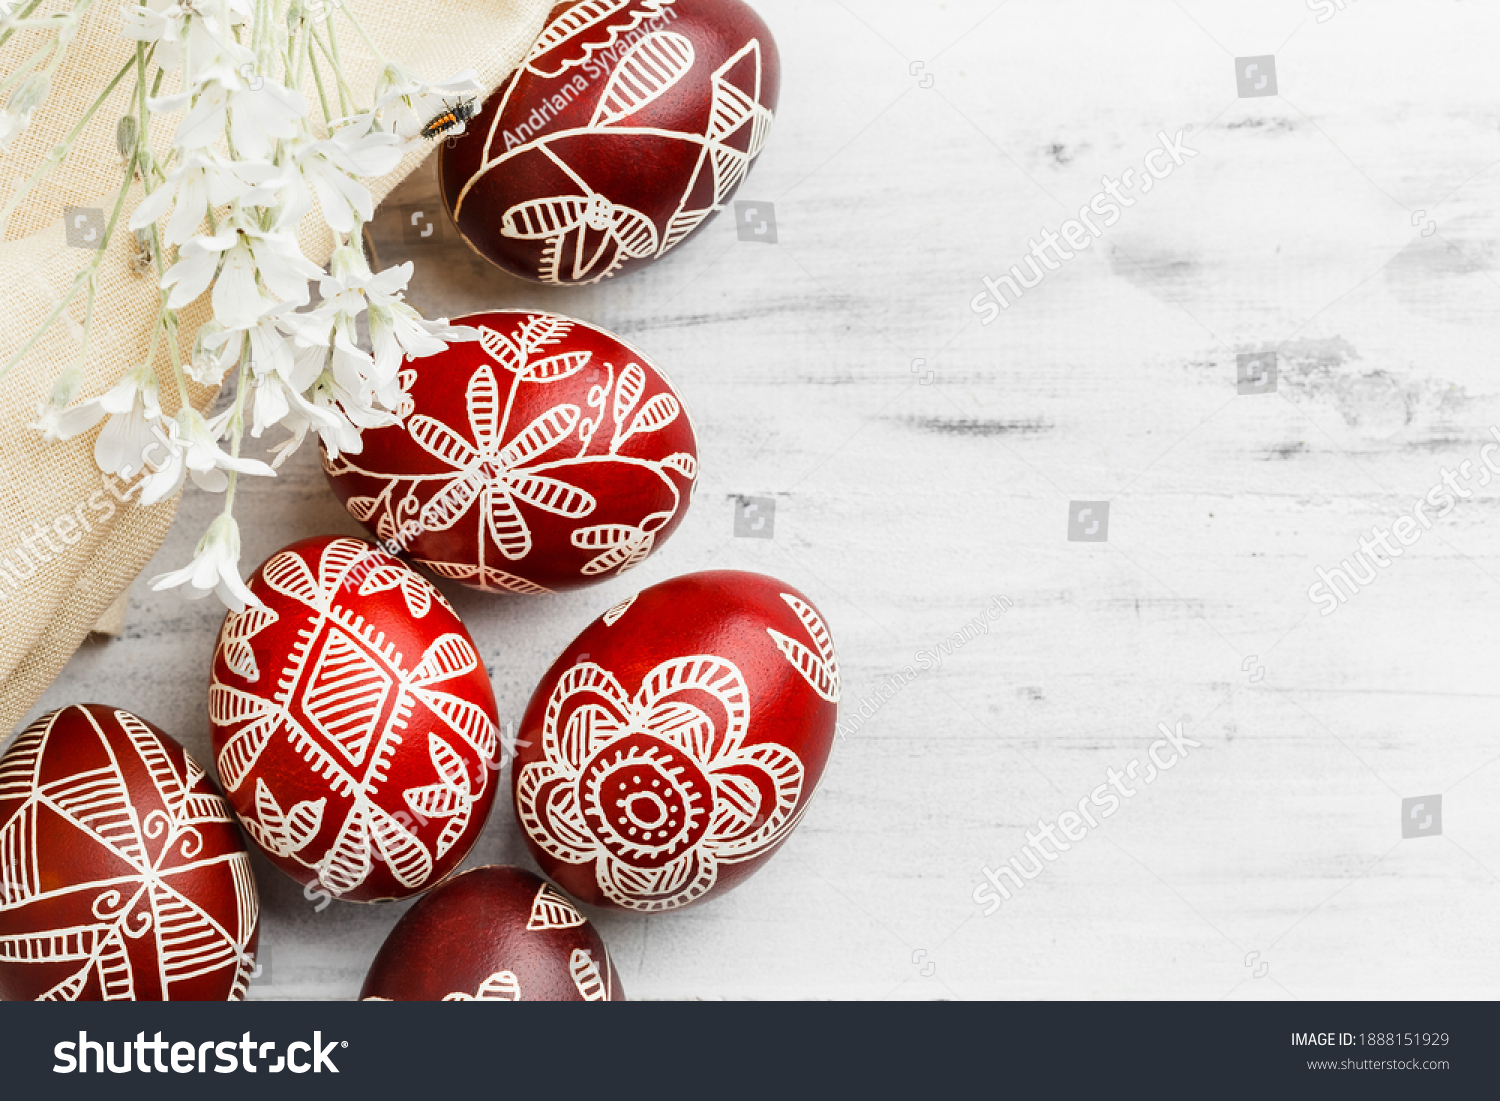 Red and white handmade Easter eggs. Ukrainian pysanka decorated with wax-resist dyeing technique. White wooden background with copy space for text #1888151929